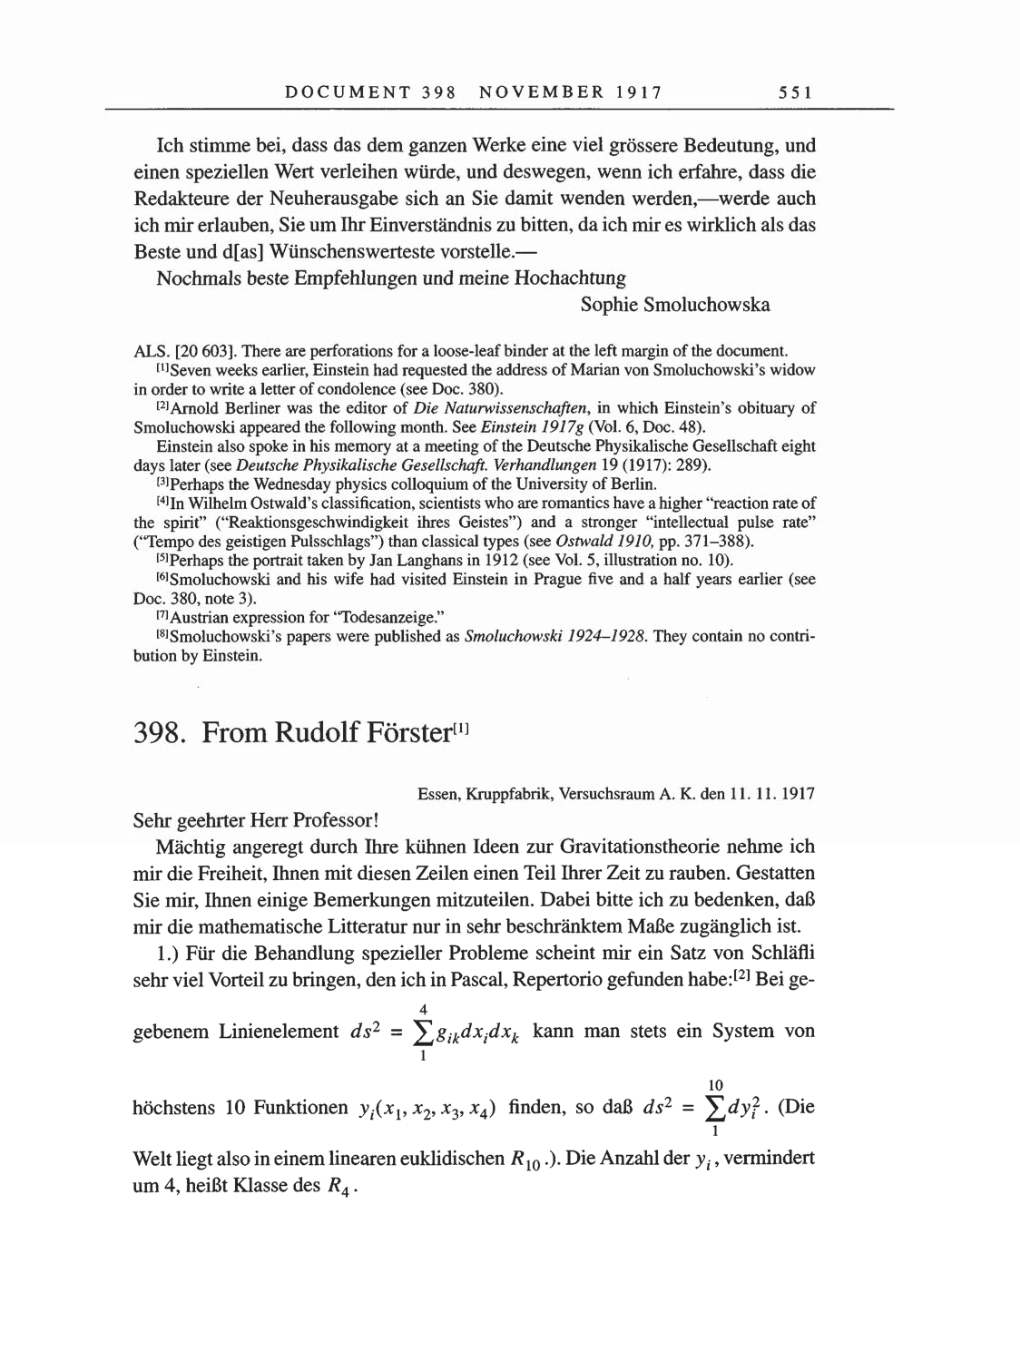 Volume 8, Part A: The Berlin Years: Correspondence 1914-1917 page 551